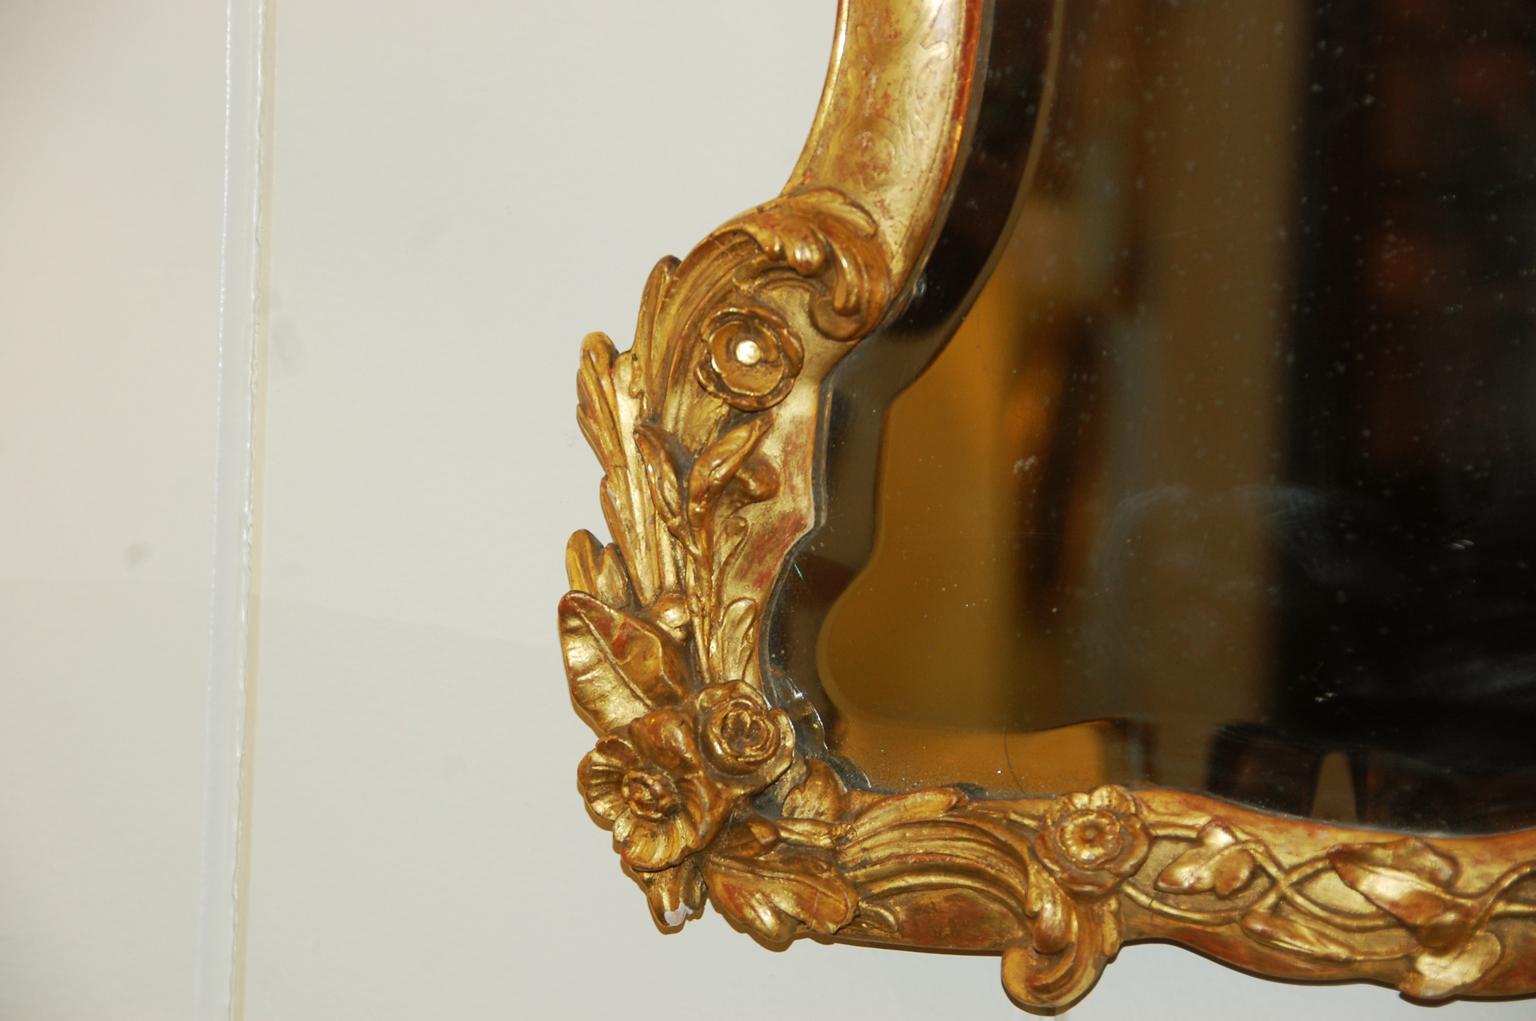 Rococo Revival Italian Venetian 19th Century Waisted Gold Mirror Carved and Gesso Decoraton